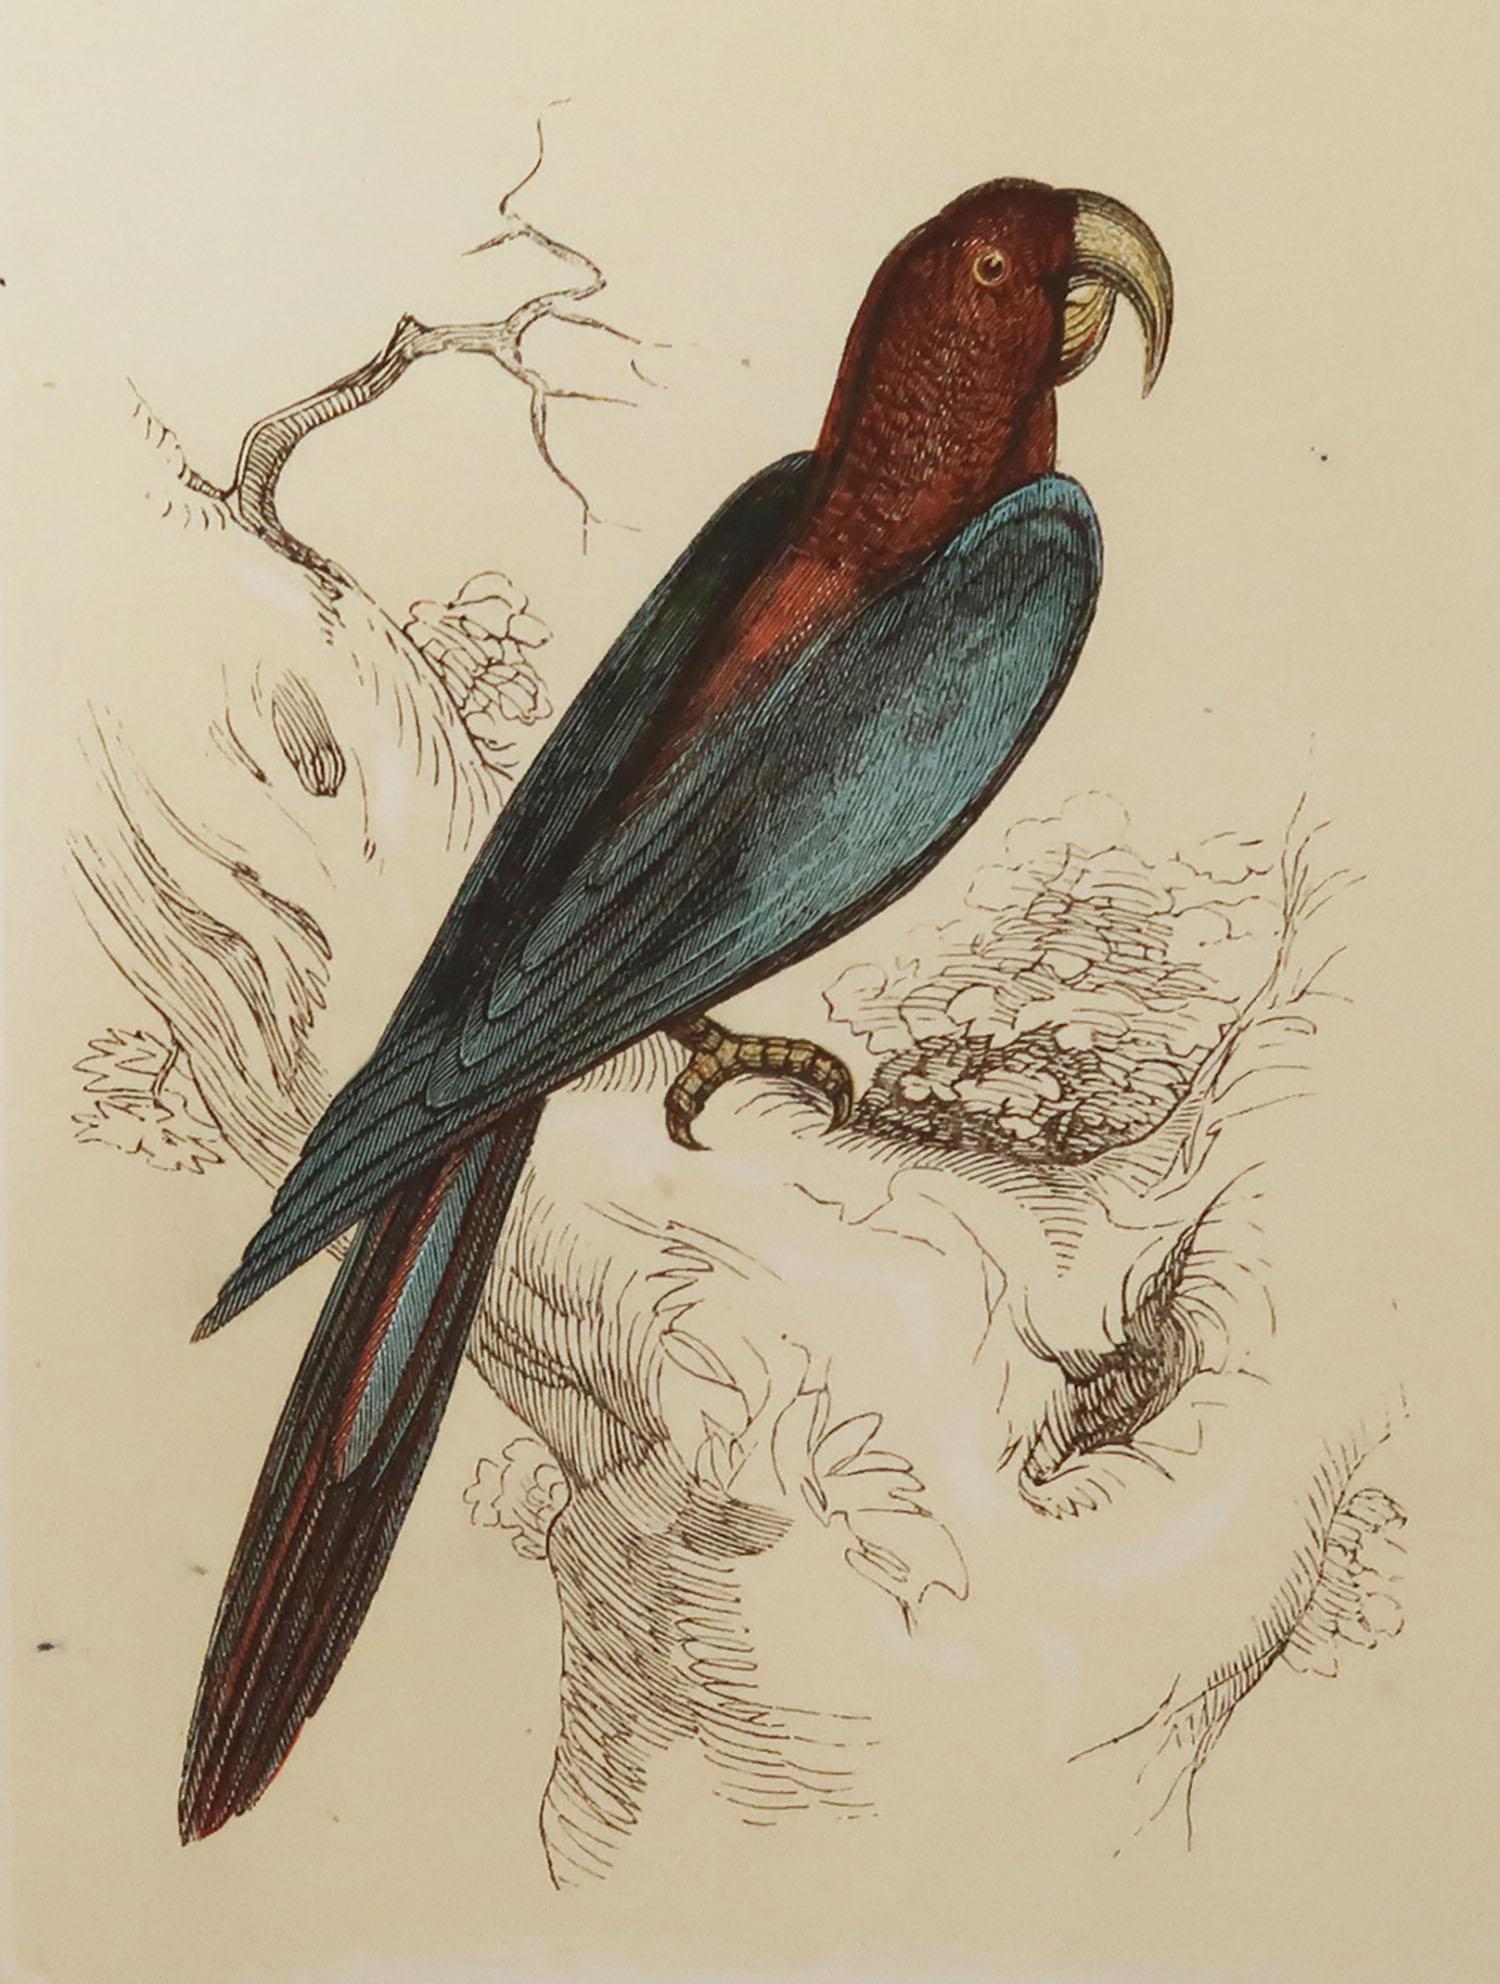 Great image of a red and blue macaw

Unframed. It gives you the option of perhaps making a set up using your own choice of frames.

Lithograph with original color.

Published by Tallis circa 1850

Crudely inscribed title has been erased at